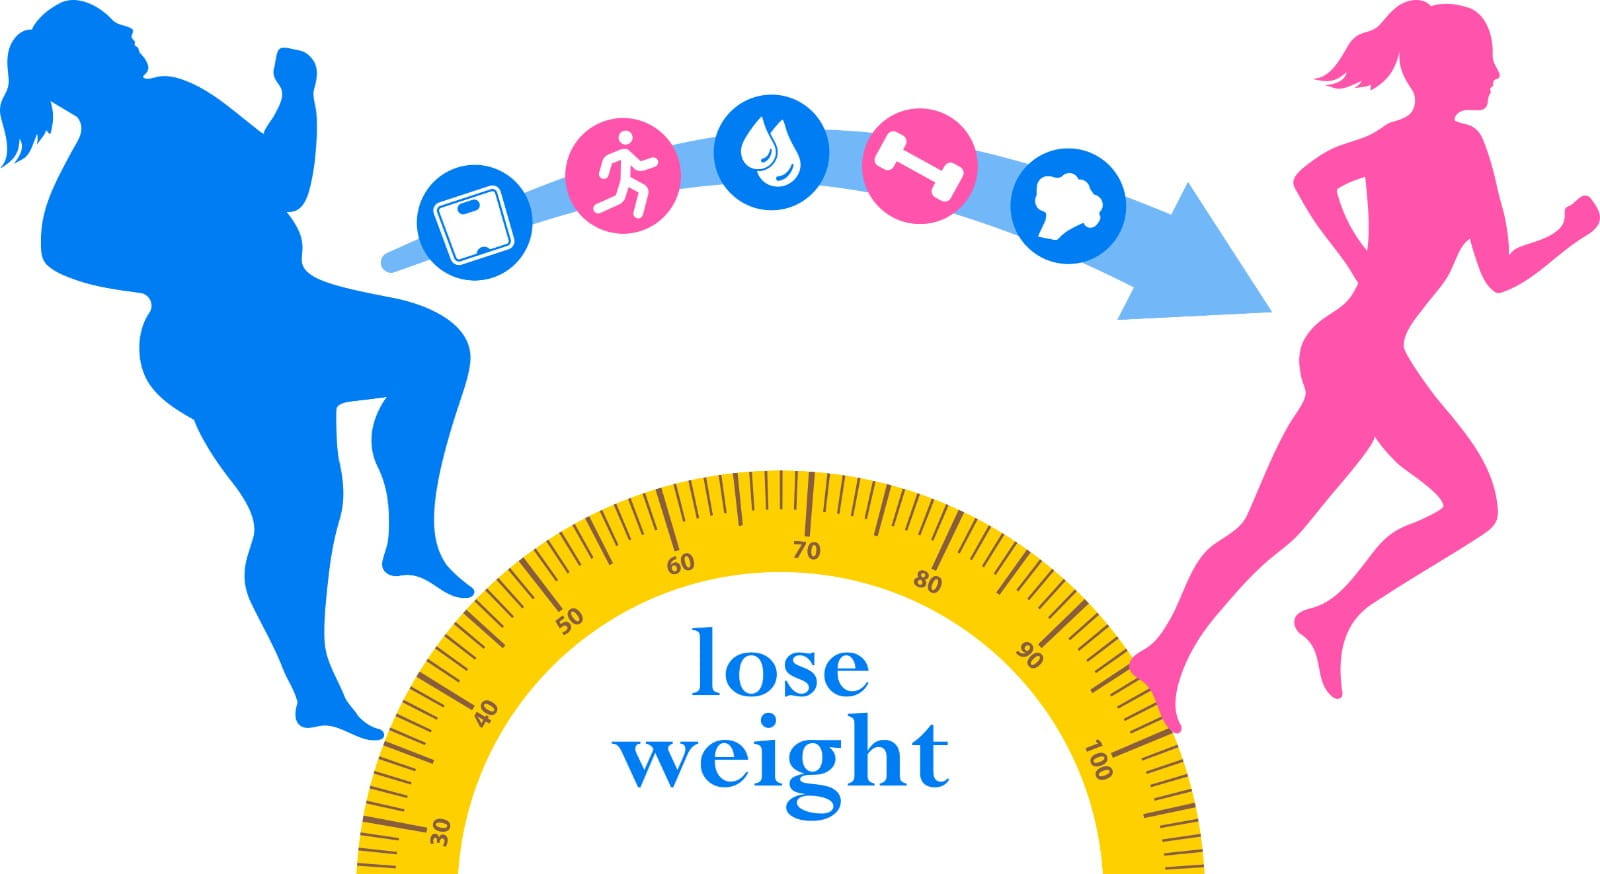 Exploring the impact of wegovy in aiding weight loss